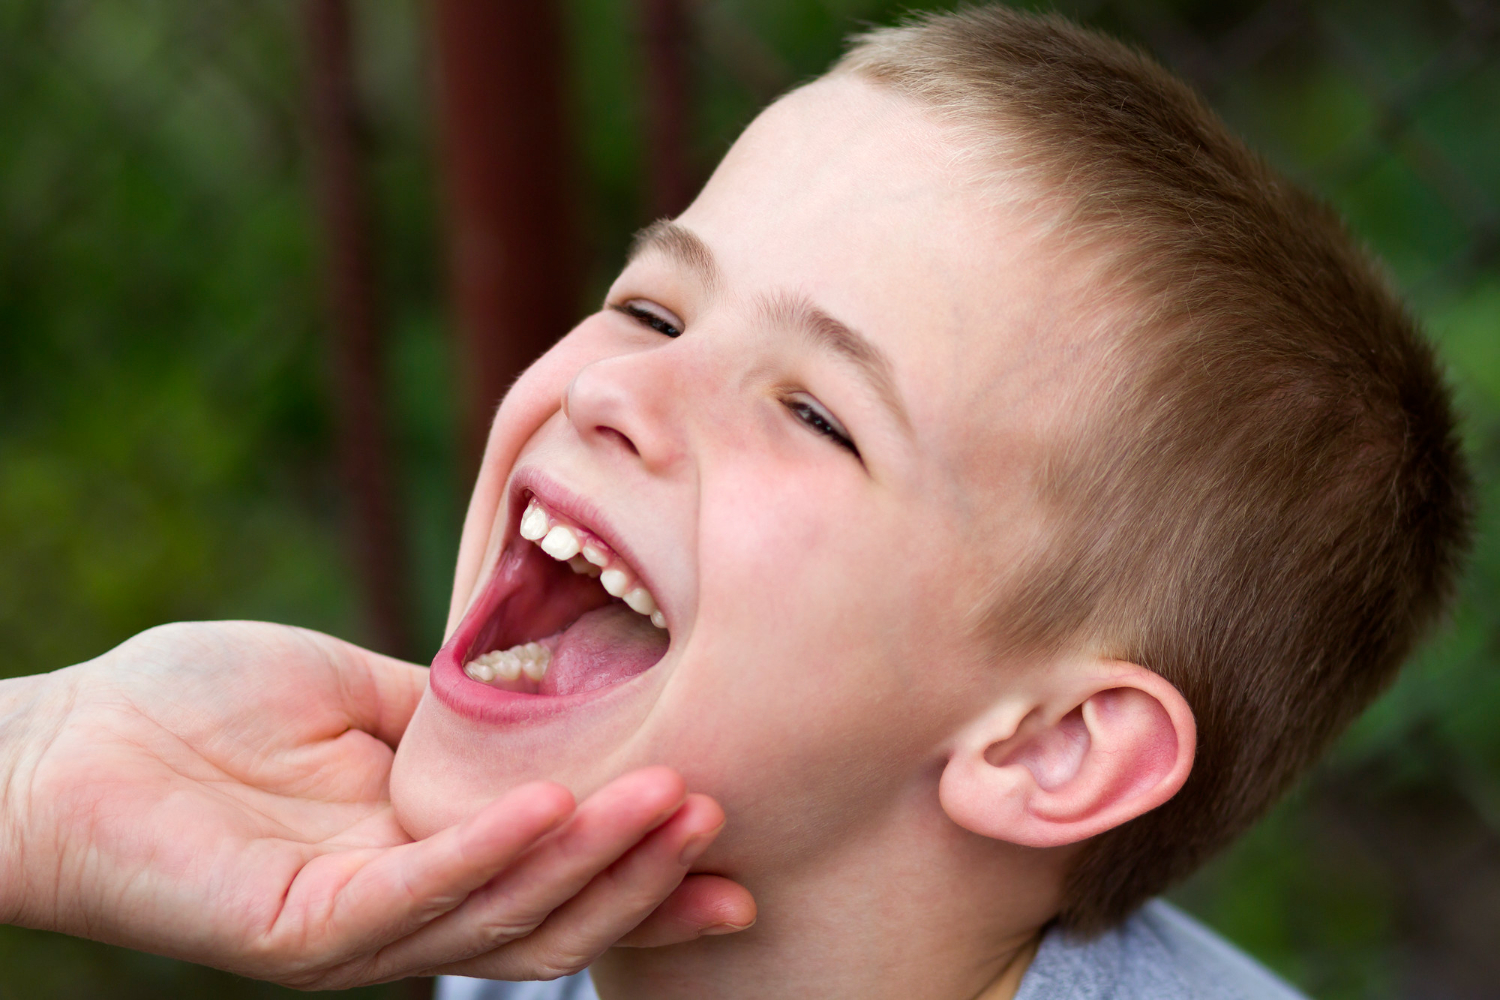 Thumb sucking and dental health in children: Insights from University Ave Dental